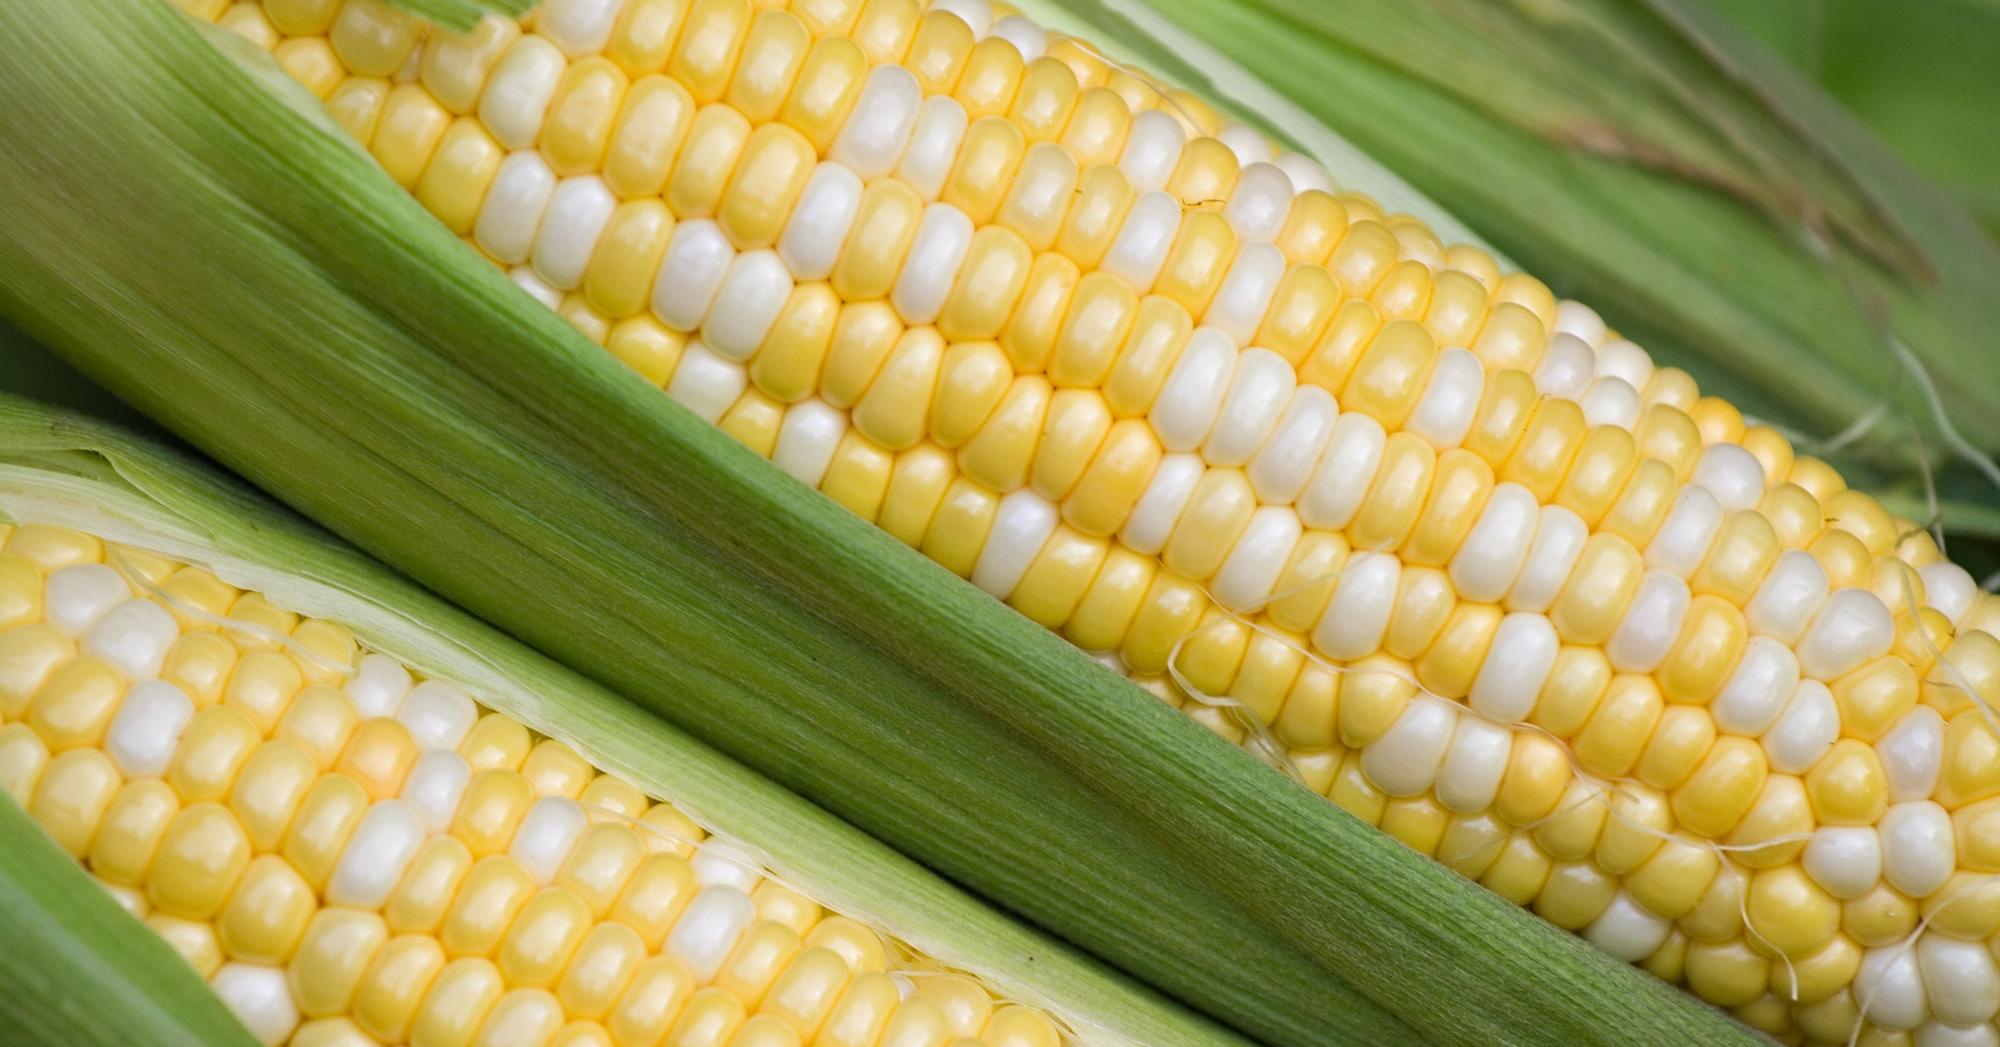 What Color Is Maize